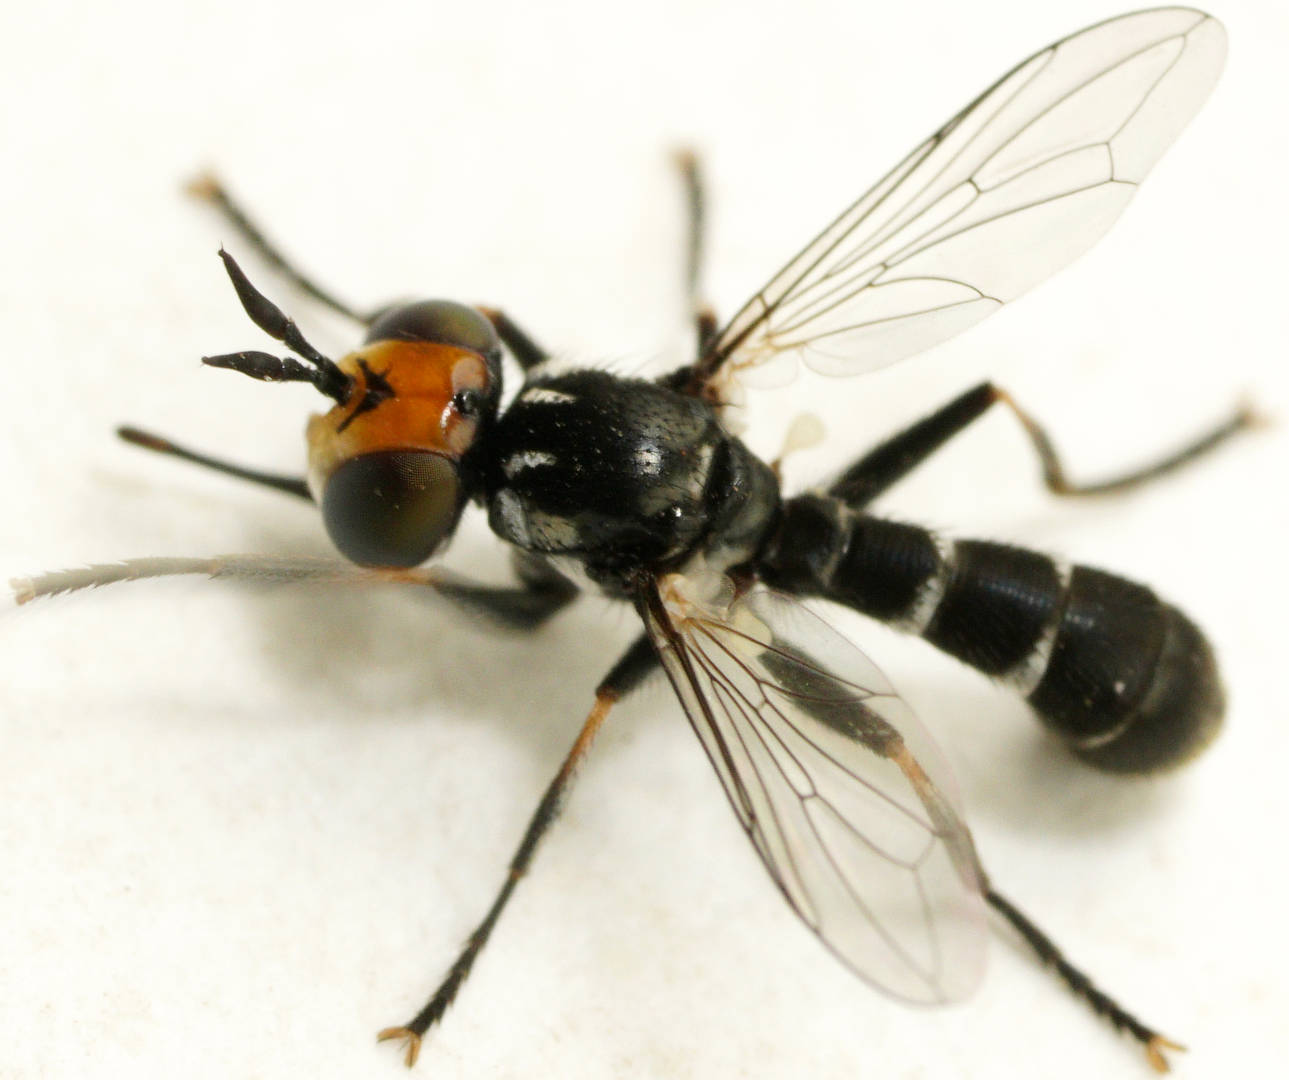 Orange-faced Thick-headed Fly (Microconops sp)